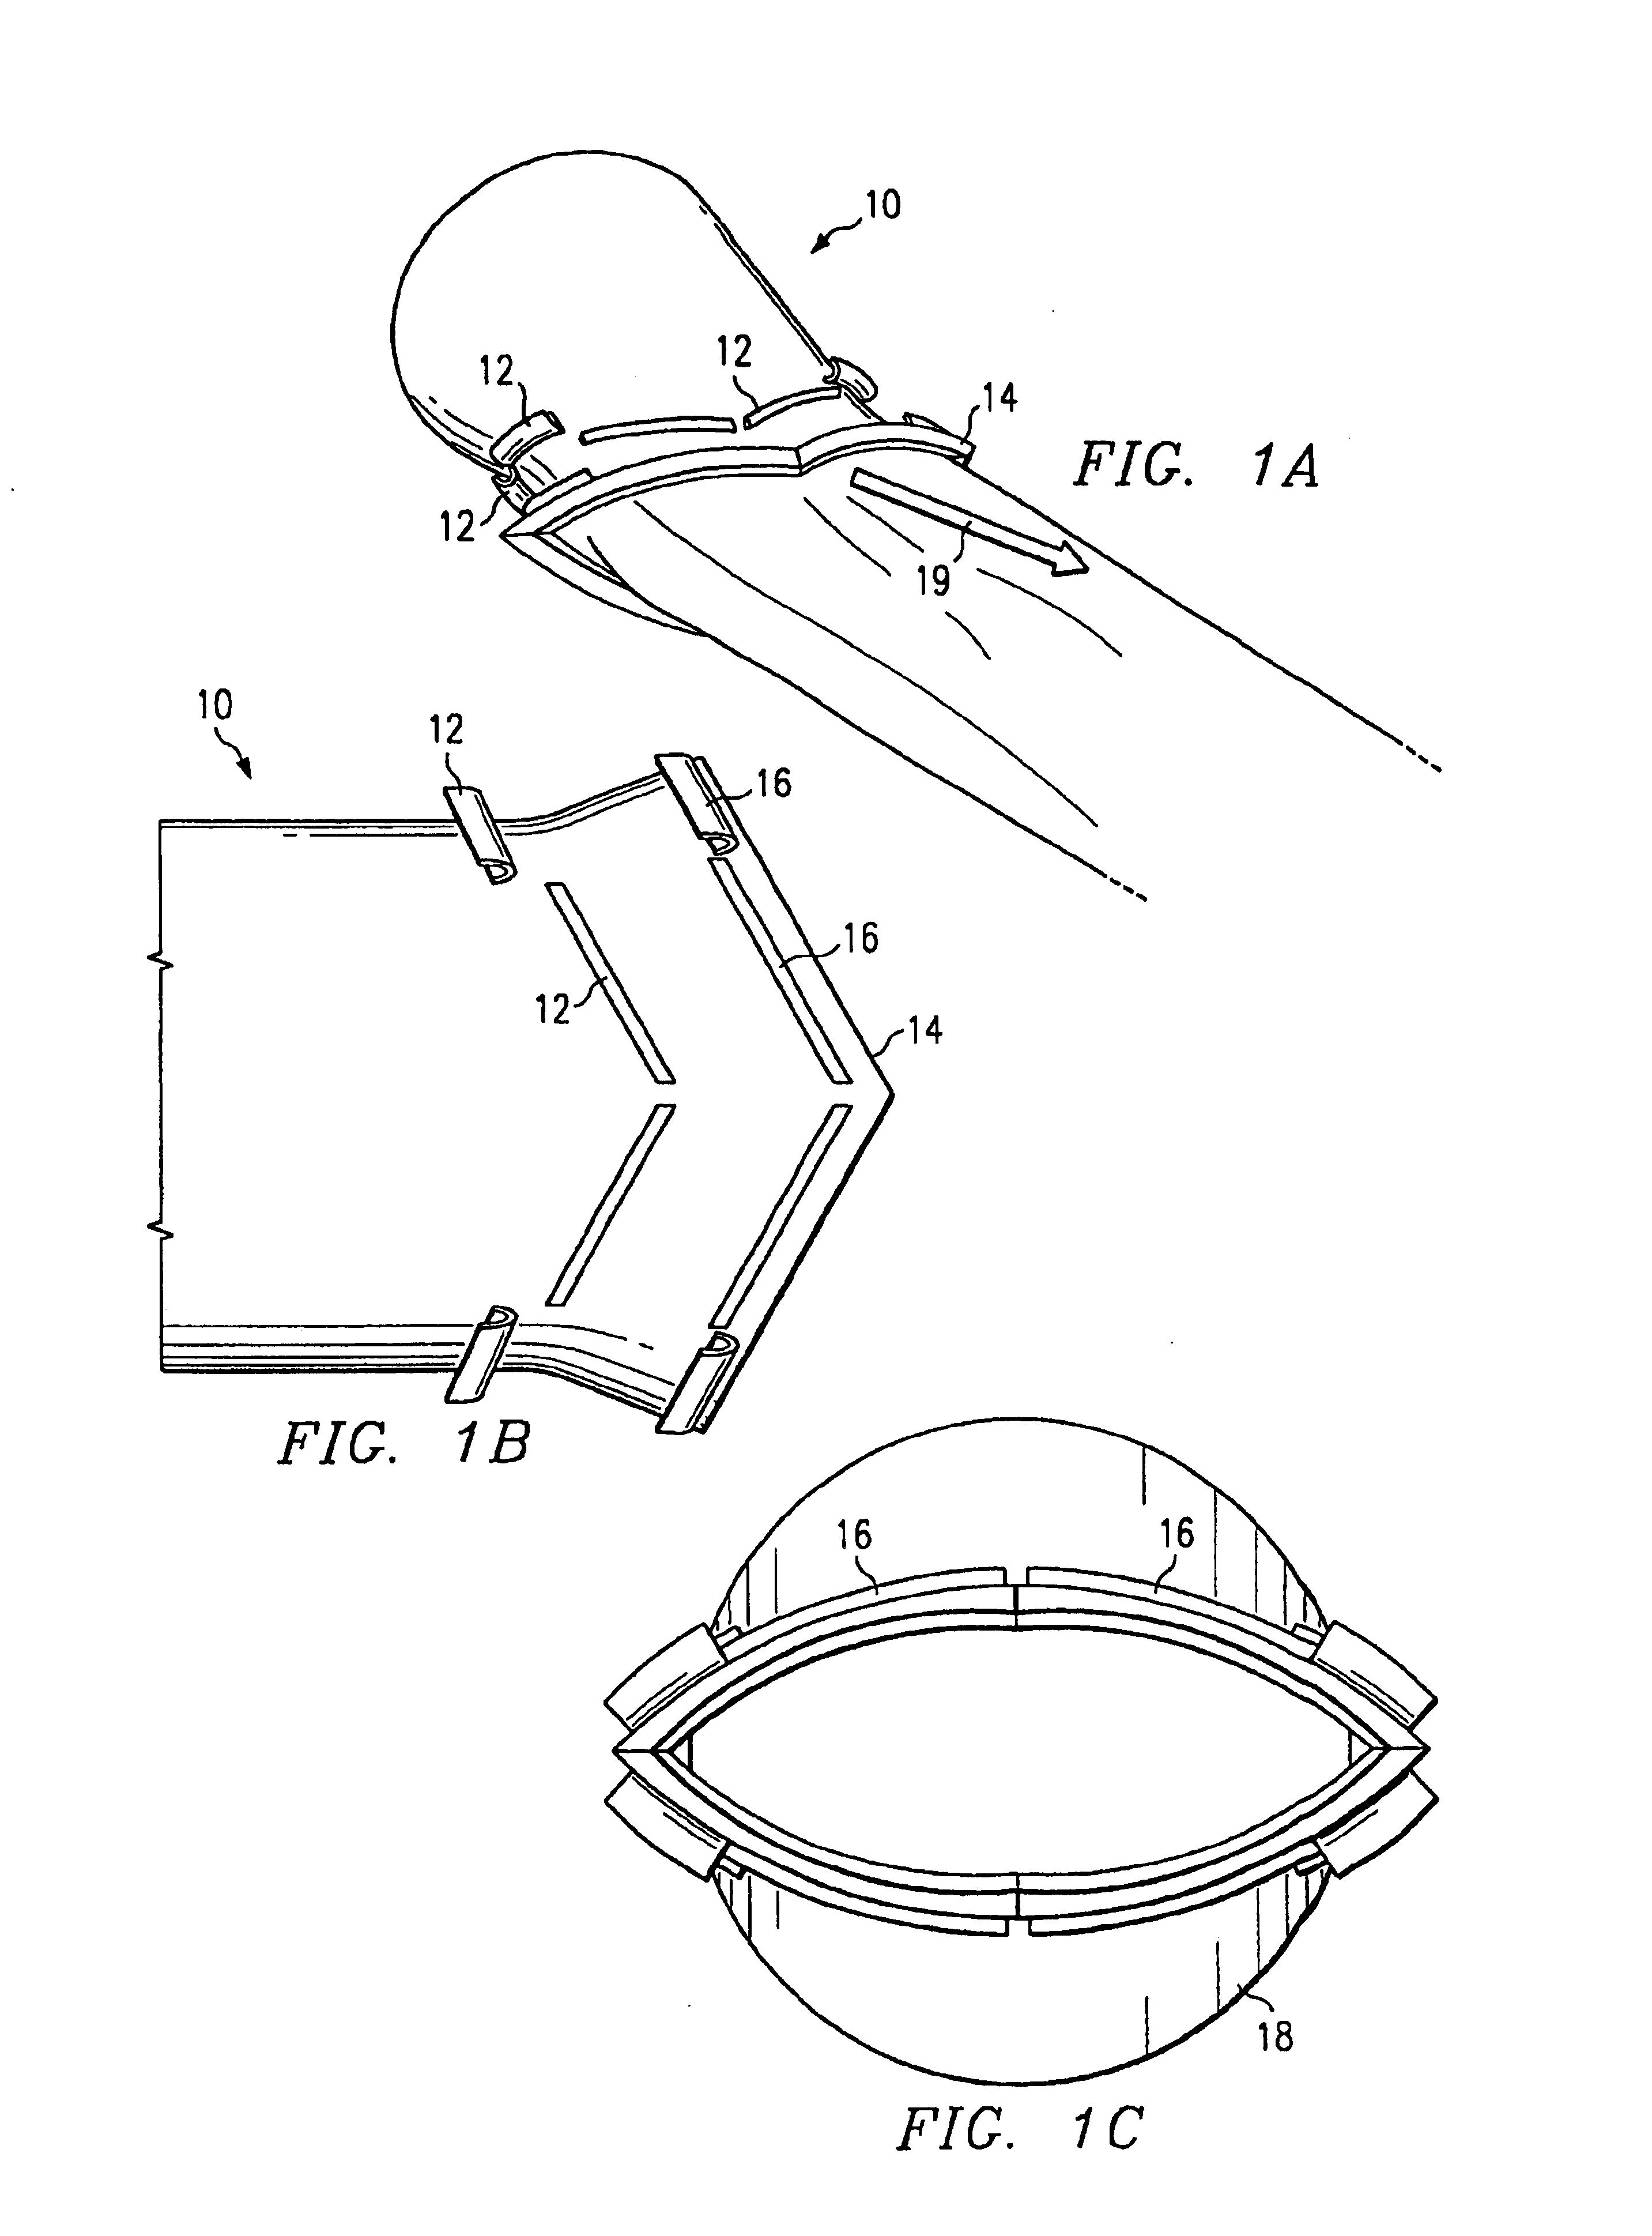 Method and apparatus of asymmetric injection into subsonic flow of a high aspect ratio/complex geometry nozzle